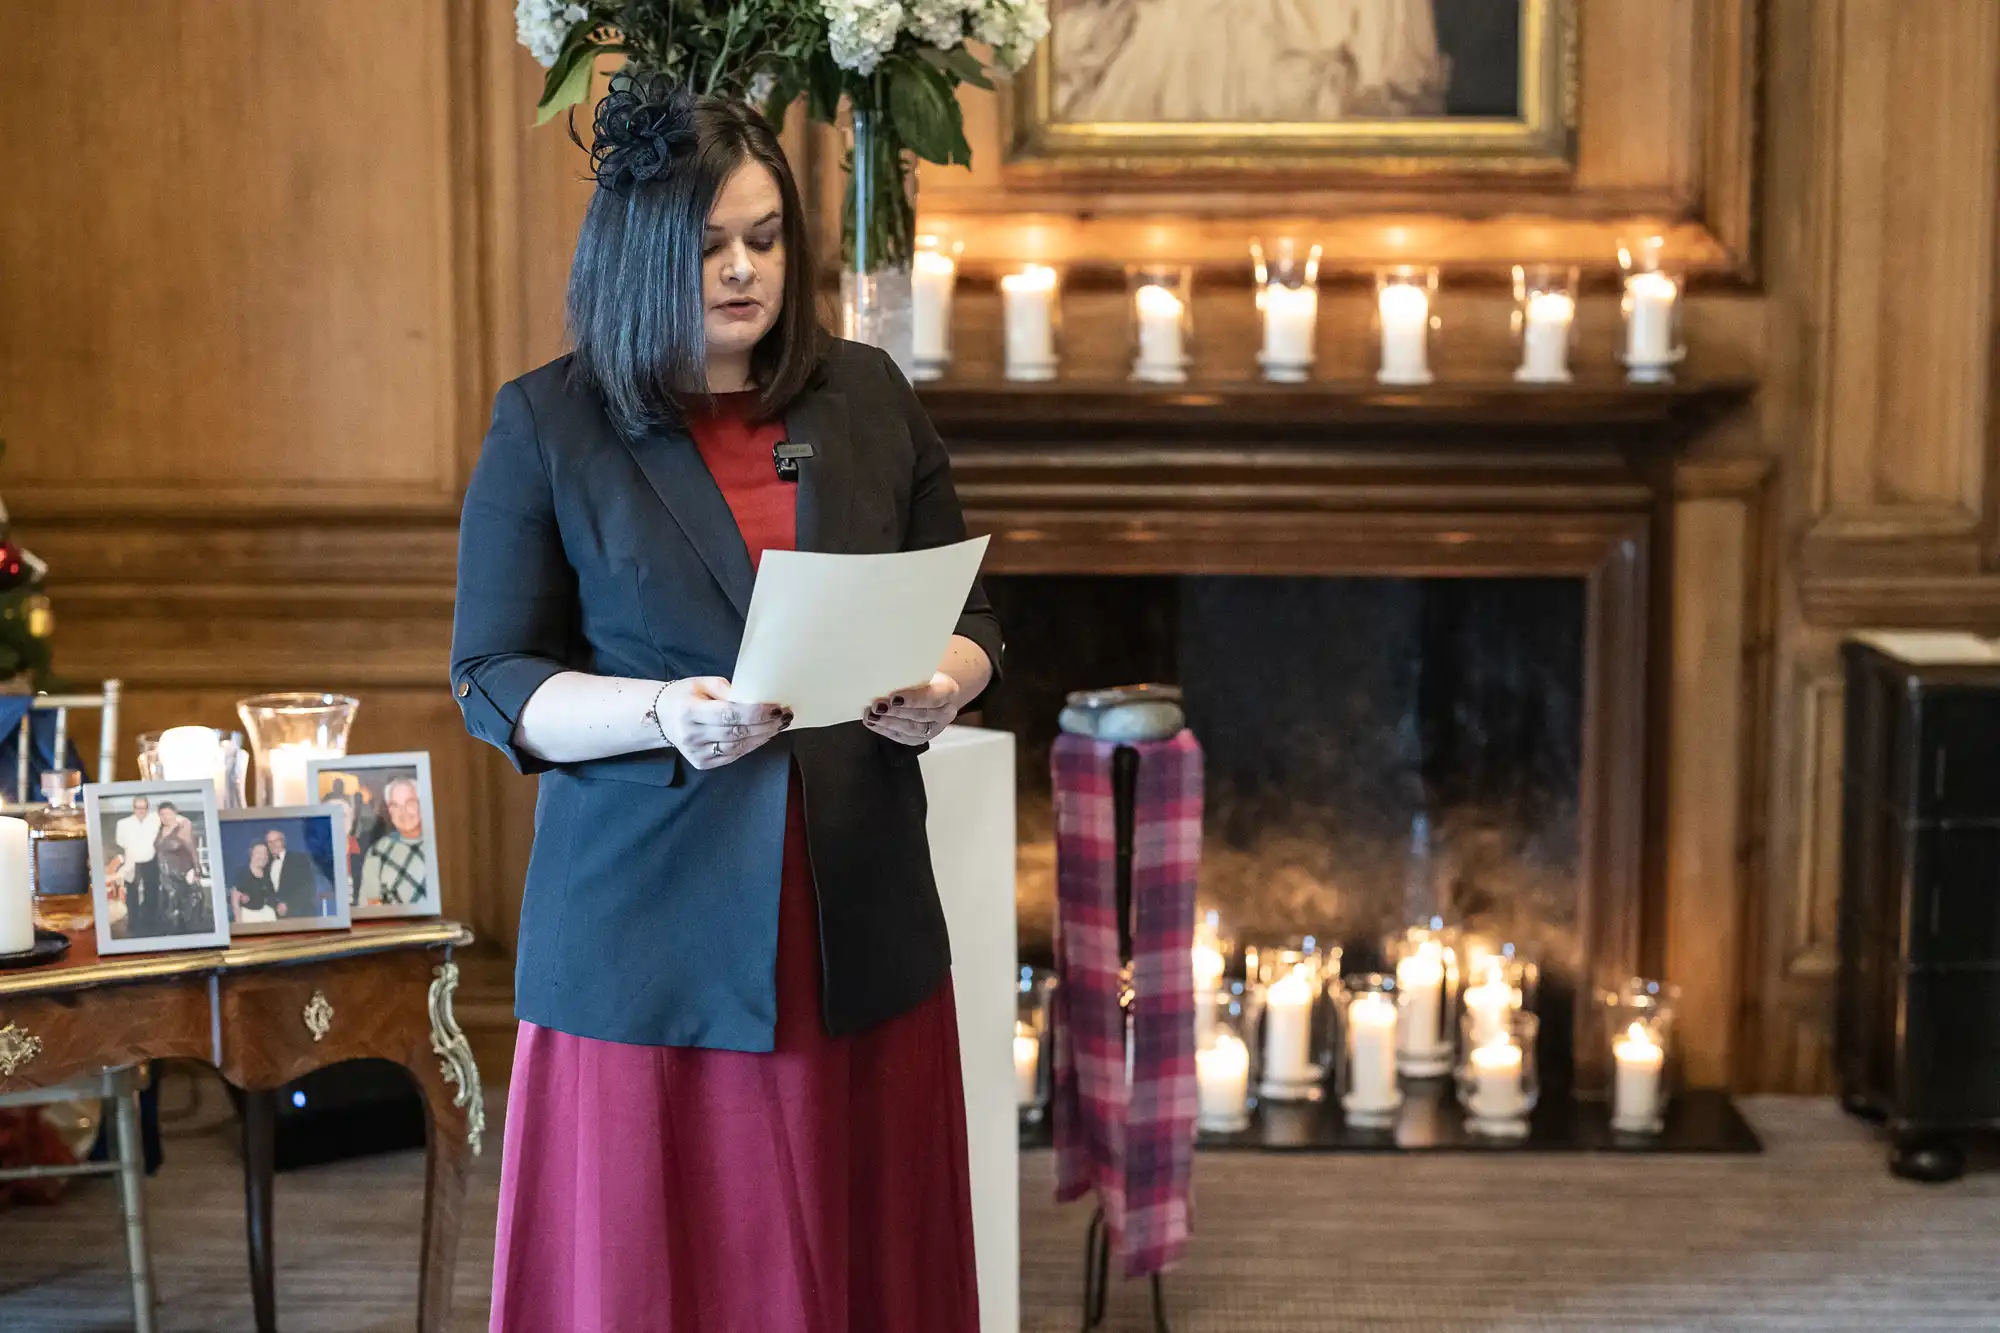 A woman in a black blazer and red dress reads from a paper in a room with lit candles, framed photographs, and floral arrangements.